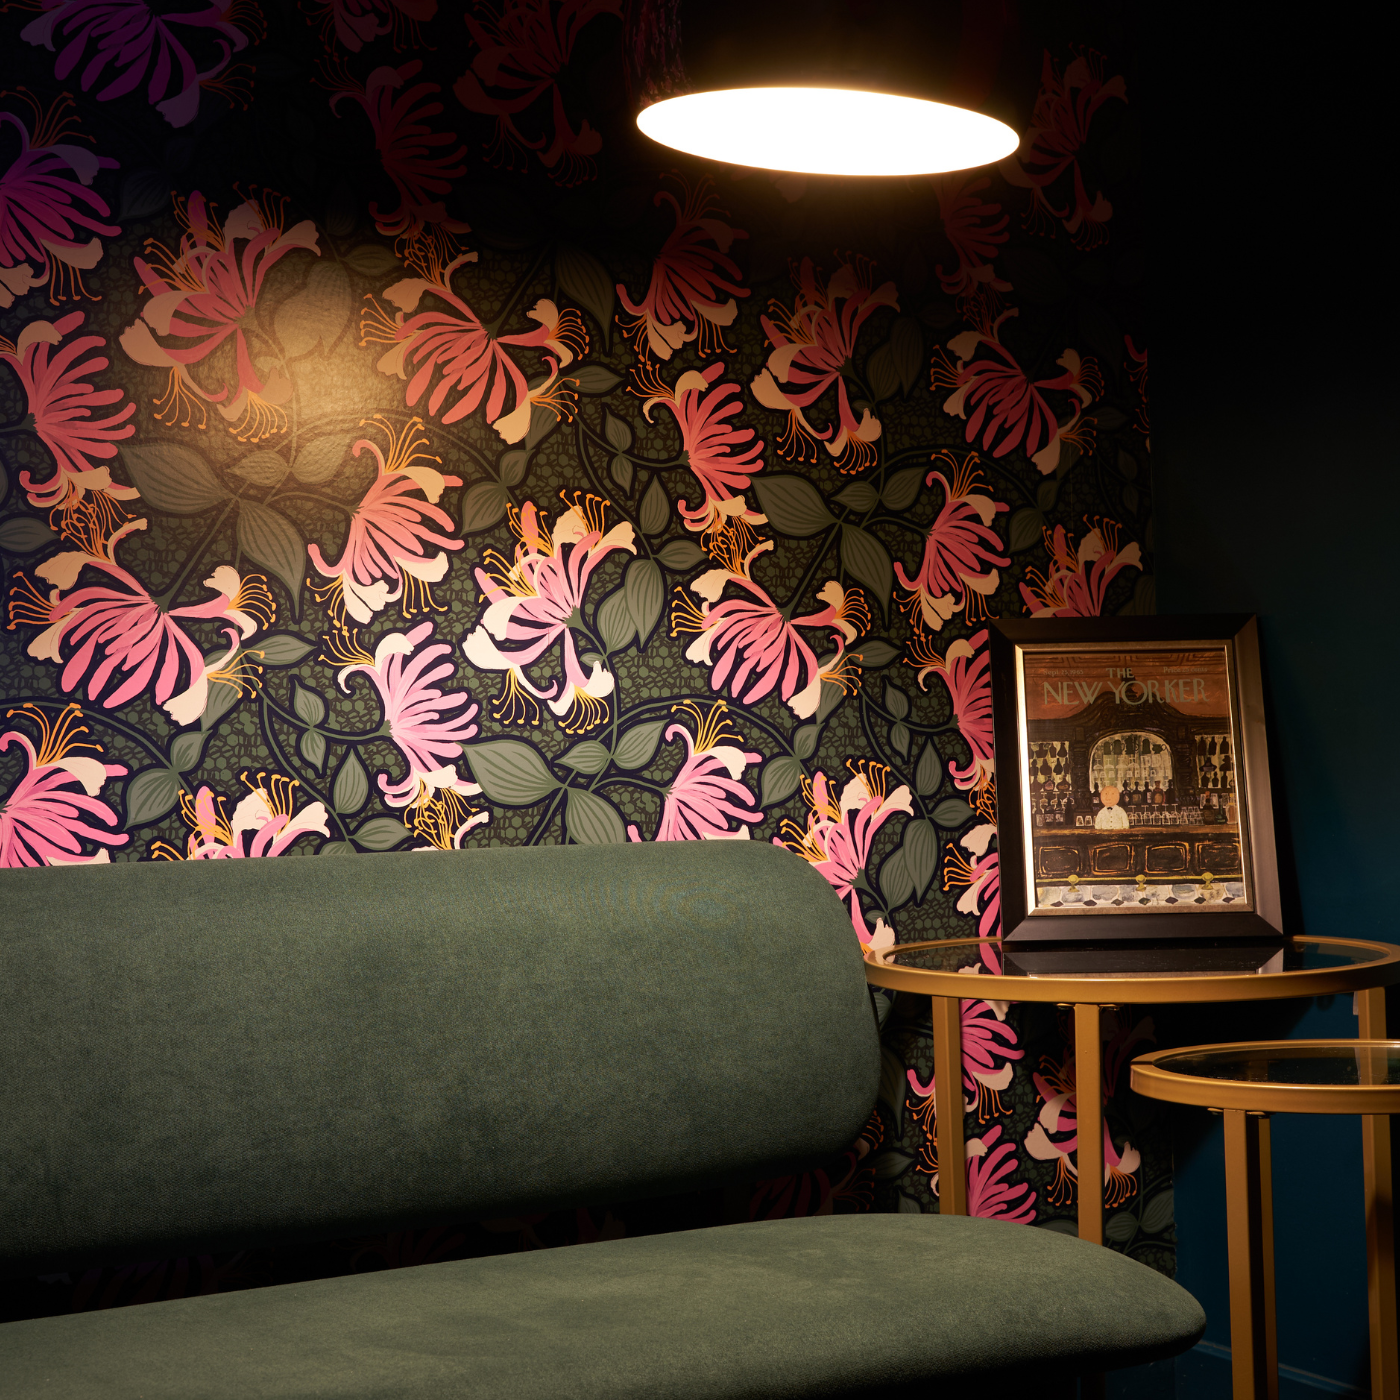 A dark green sofa sits underneath a large tall lamp with a small wooden table beside it. The wallpaper behind the sofa has a black background and hot pink flowers extending in all directions each with a grouping of small green leaves.